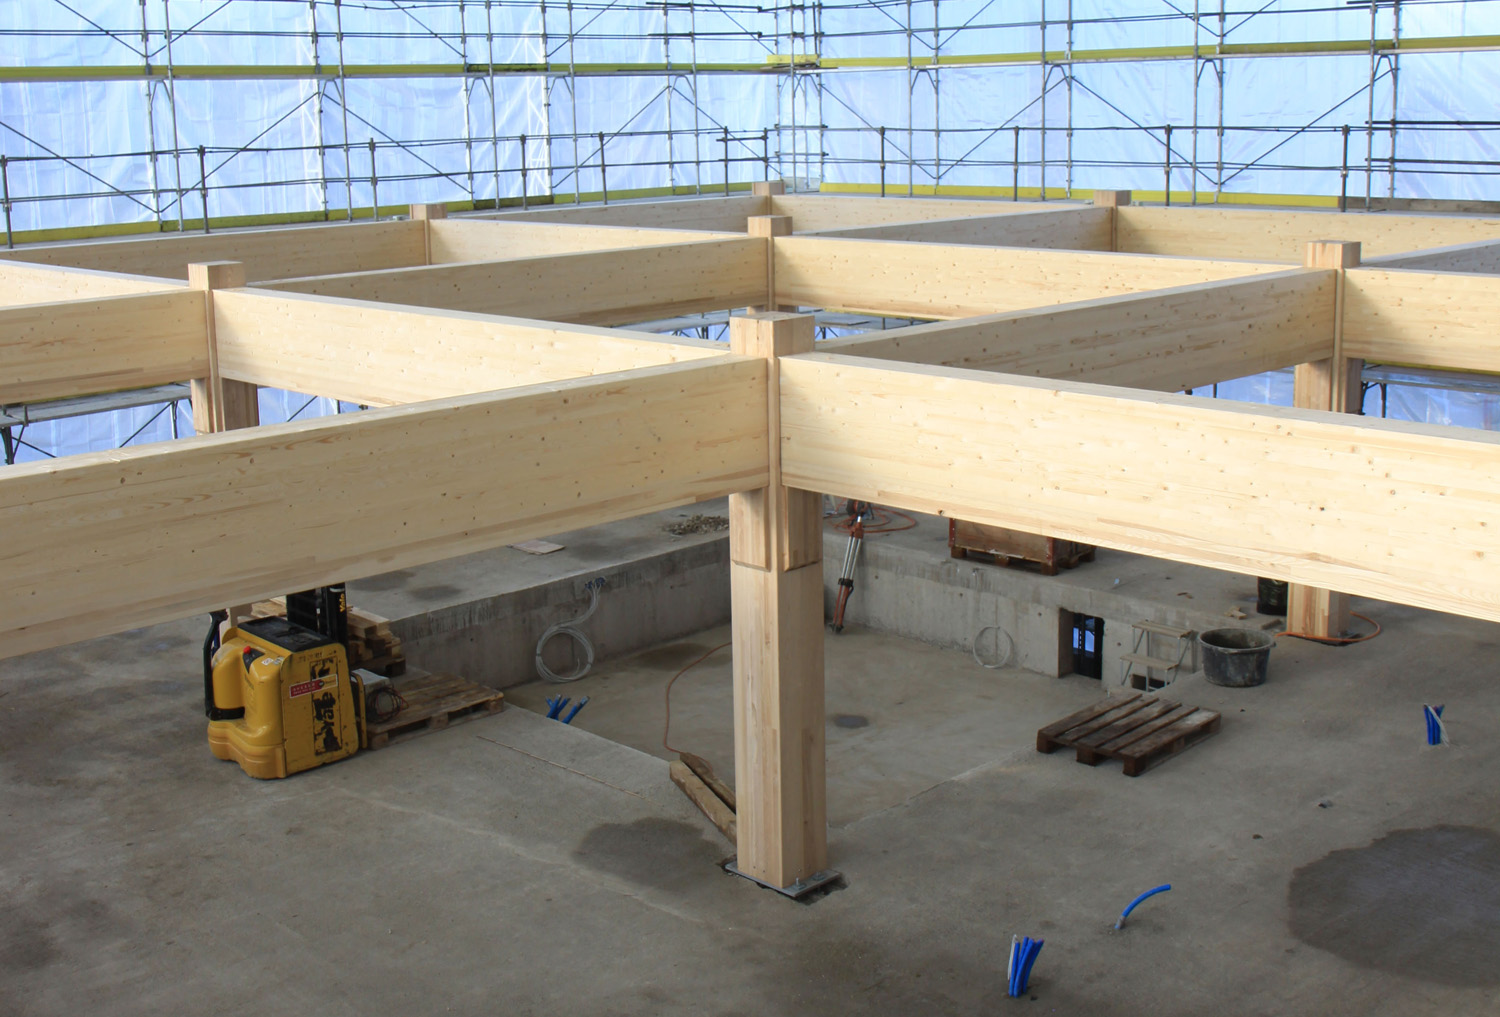 wooden frame on a concrete floor - very big